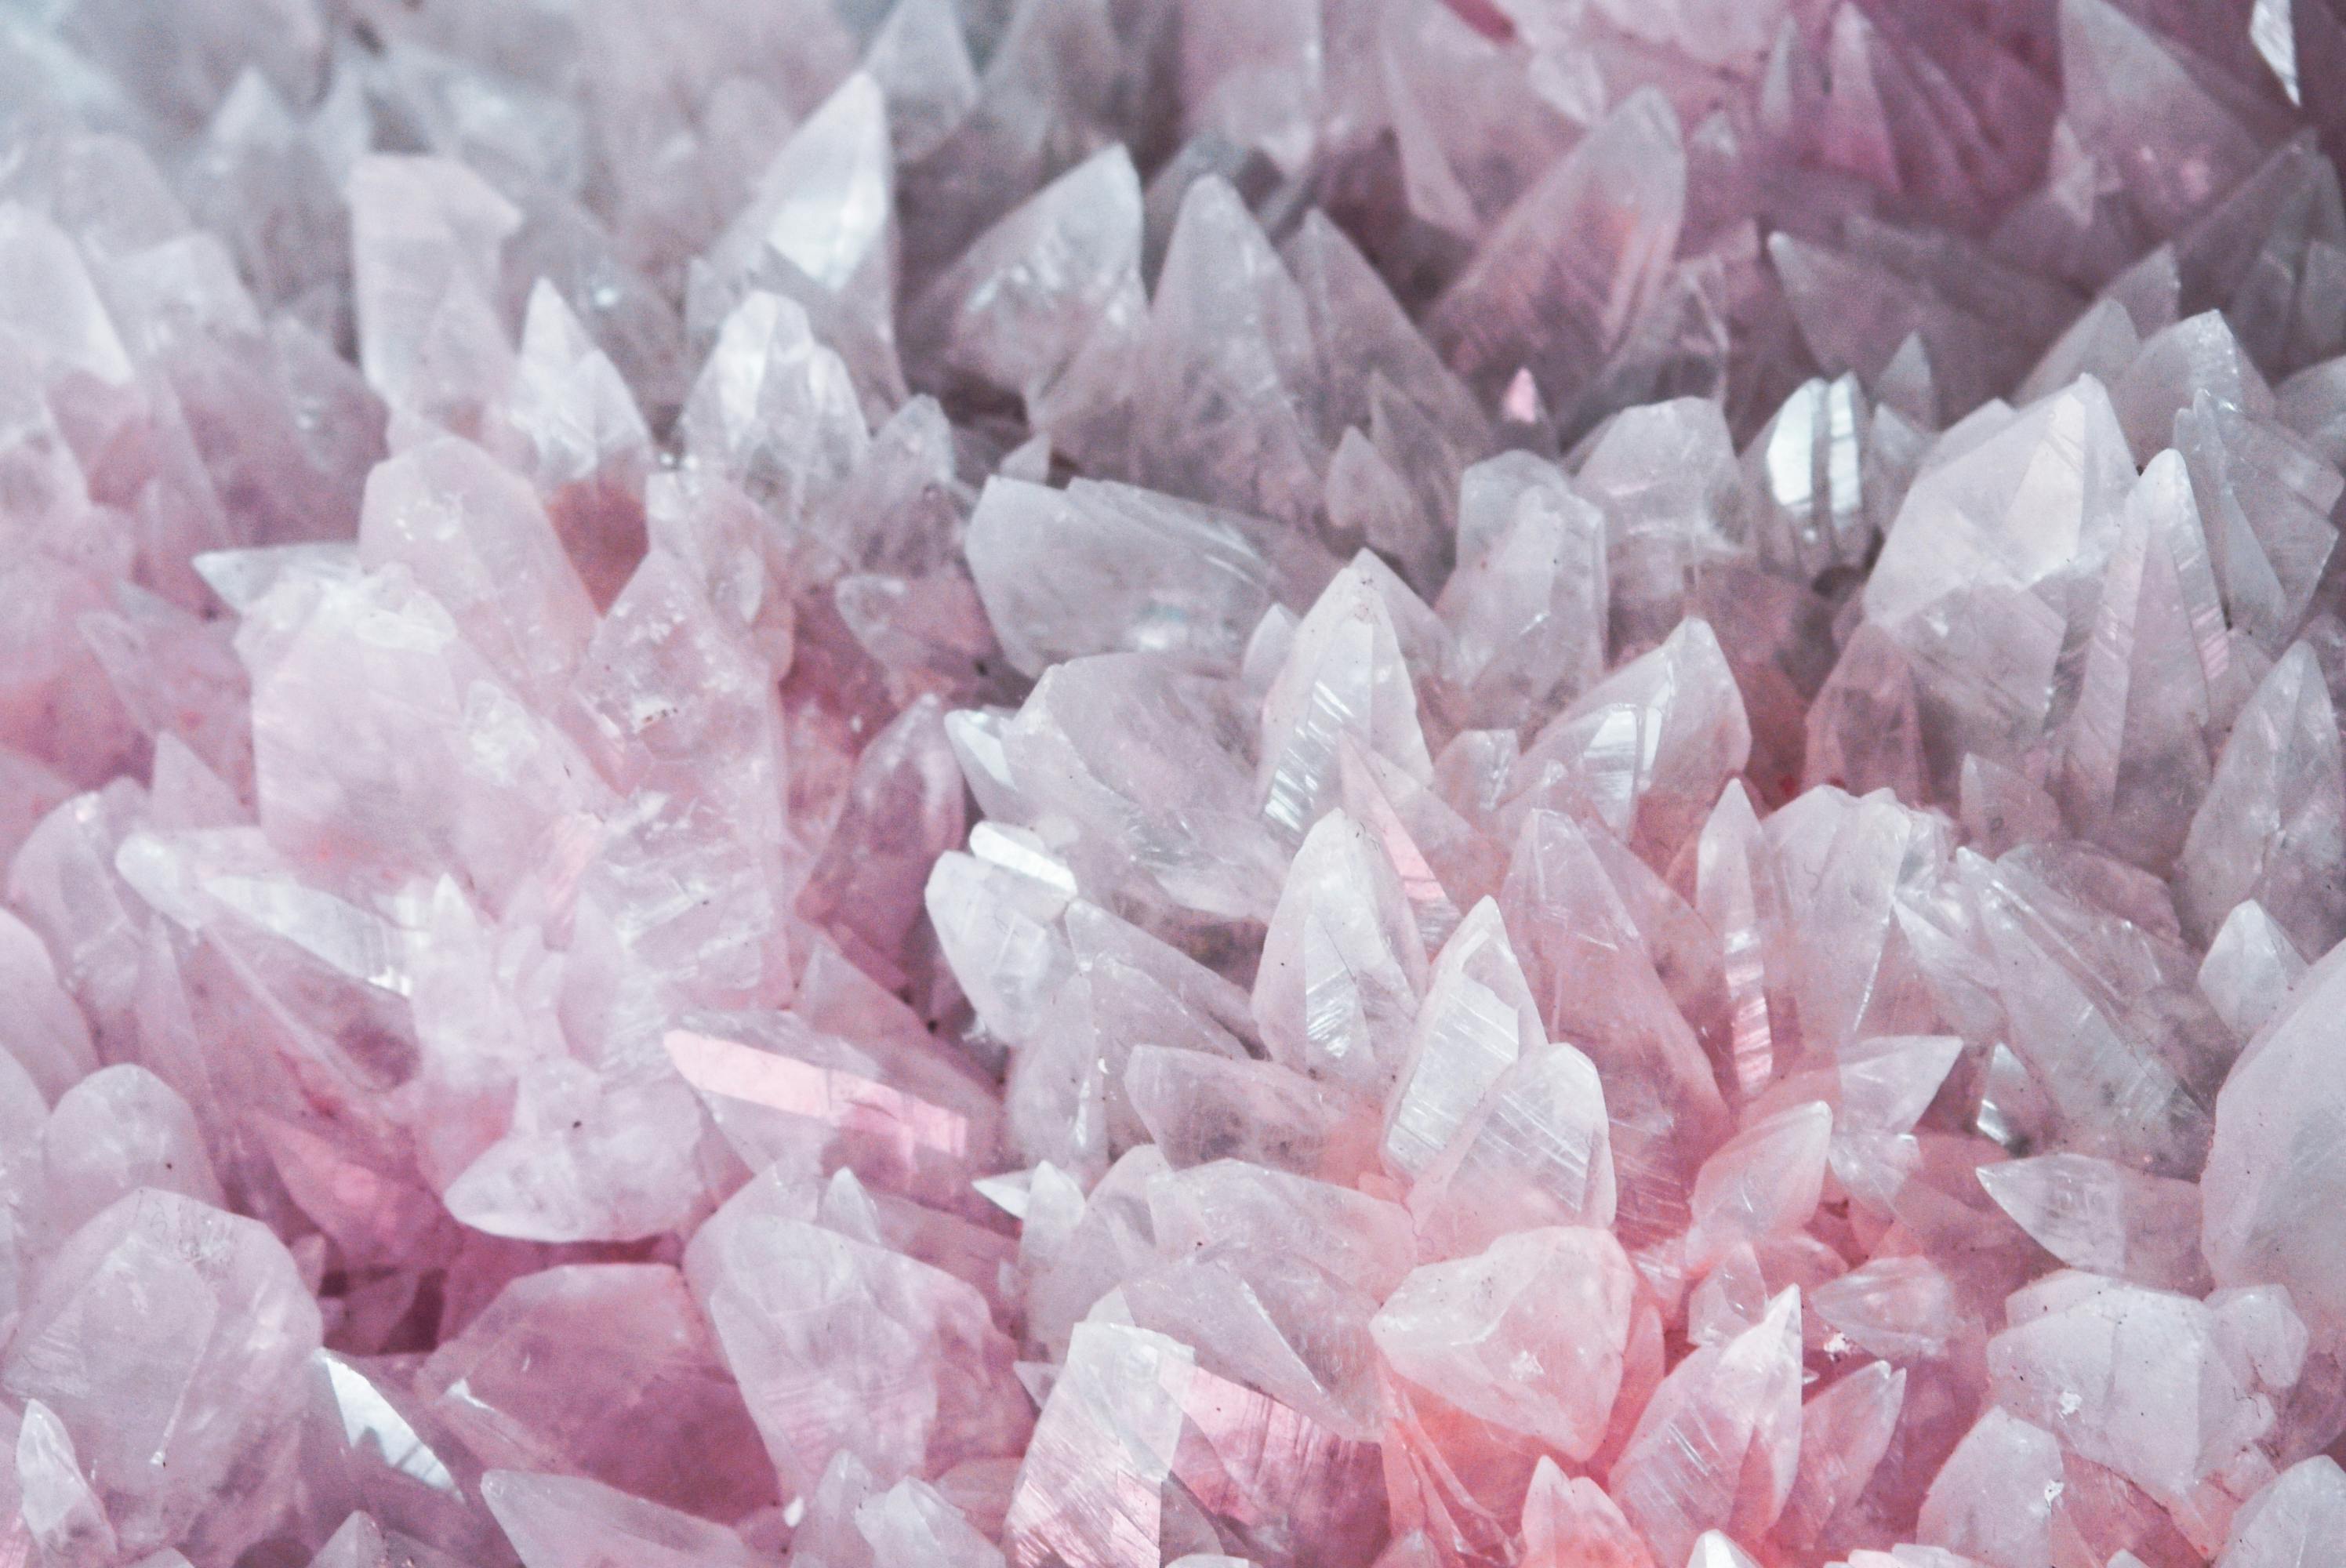 Crystal Background Images HD Pictures and Wallpaper For Free Download   Pngtree